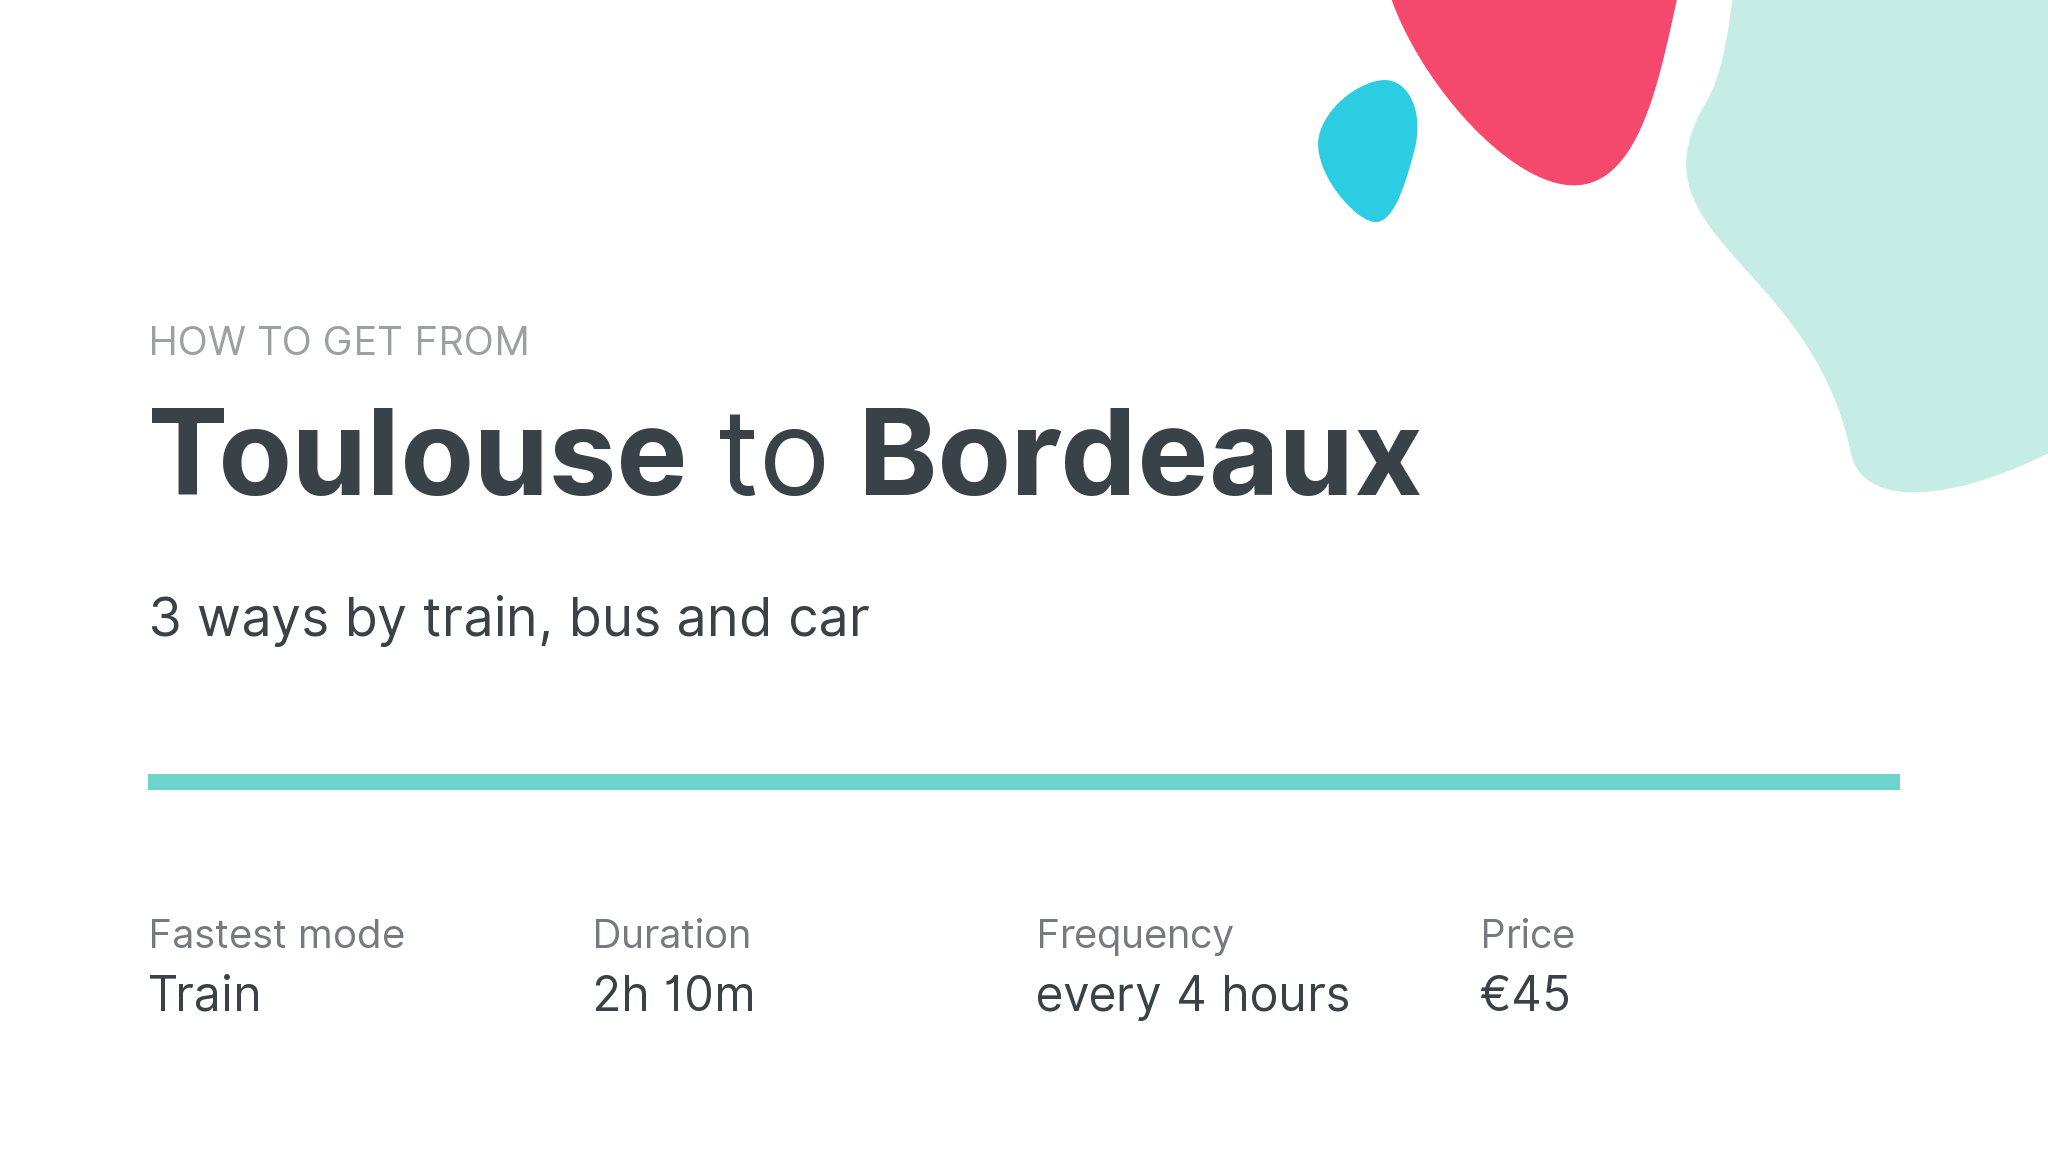 How do I get from Toulouse to Bordeaux